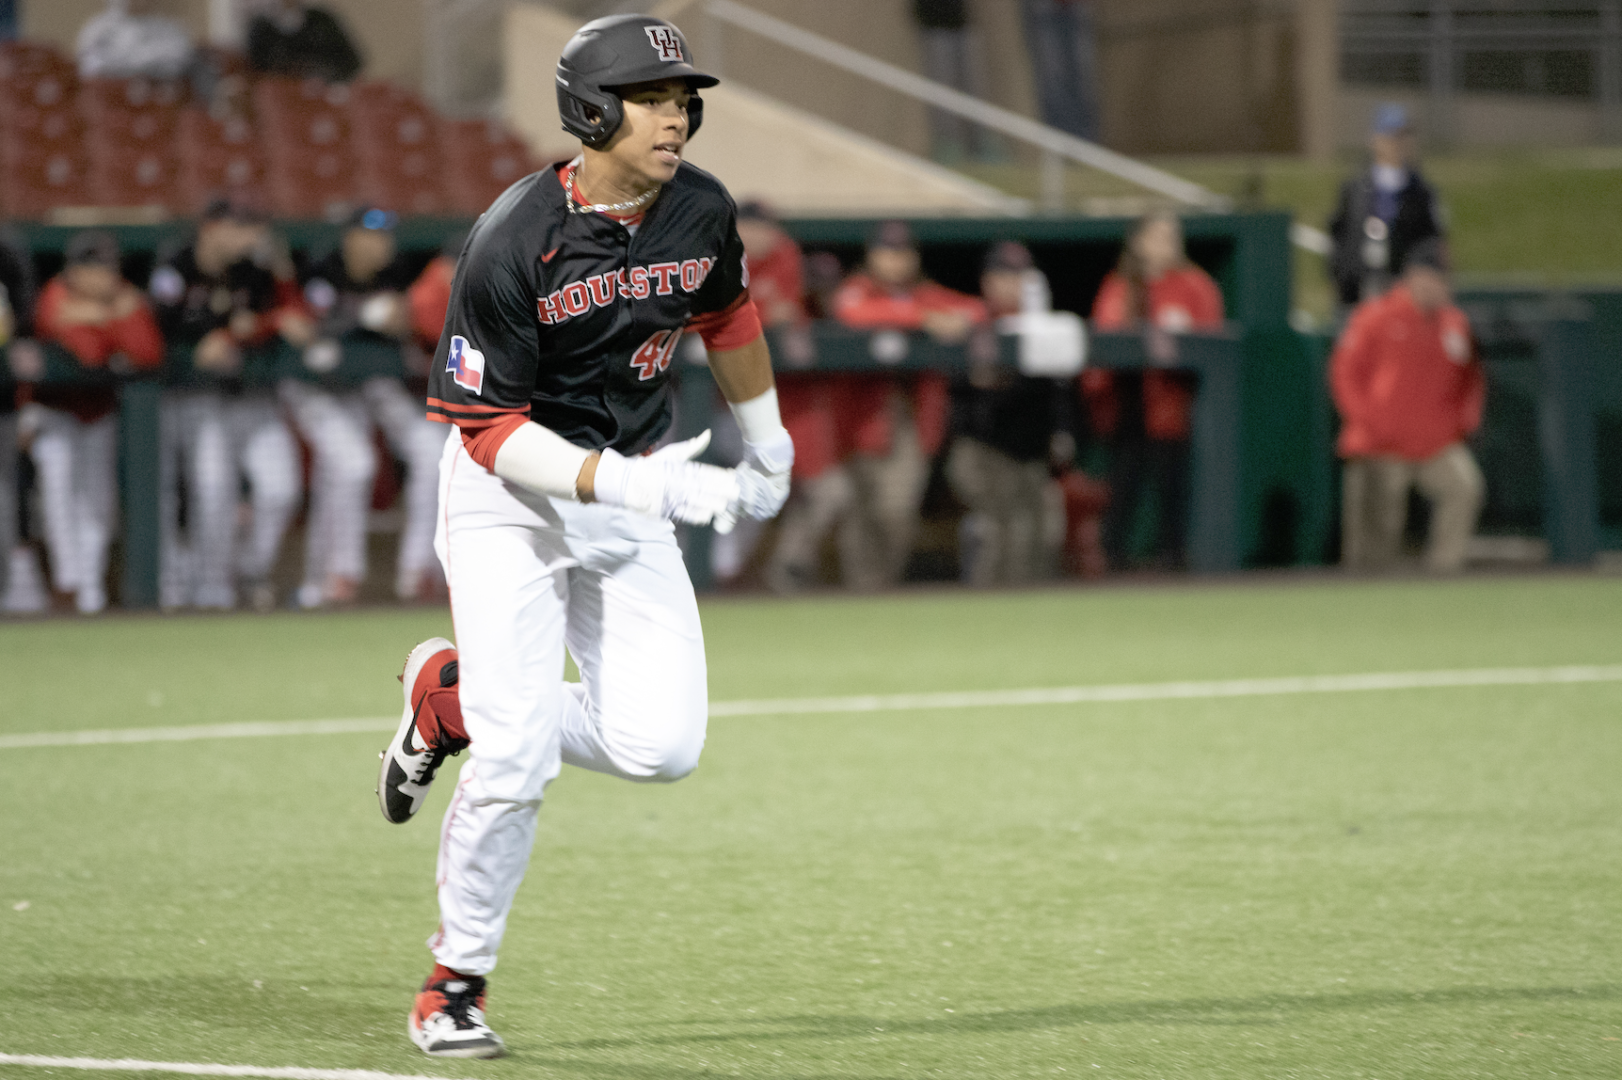 Junior second baseman Ryan Hernandez tripled and hit a home run in Houston 5-1 bounce-back win over Texas State on Saturday at Schroeder Park. | Jhair Romero/The Cougar